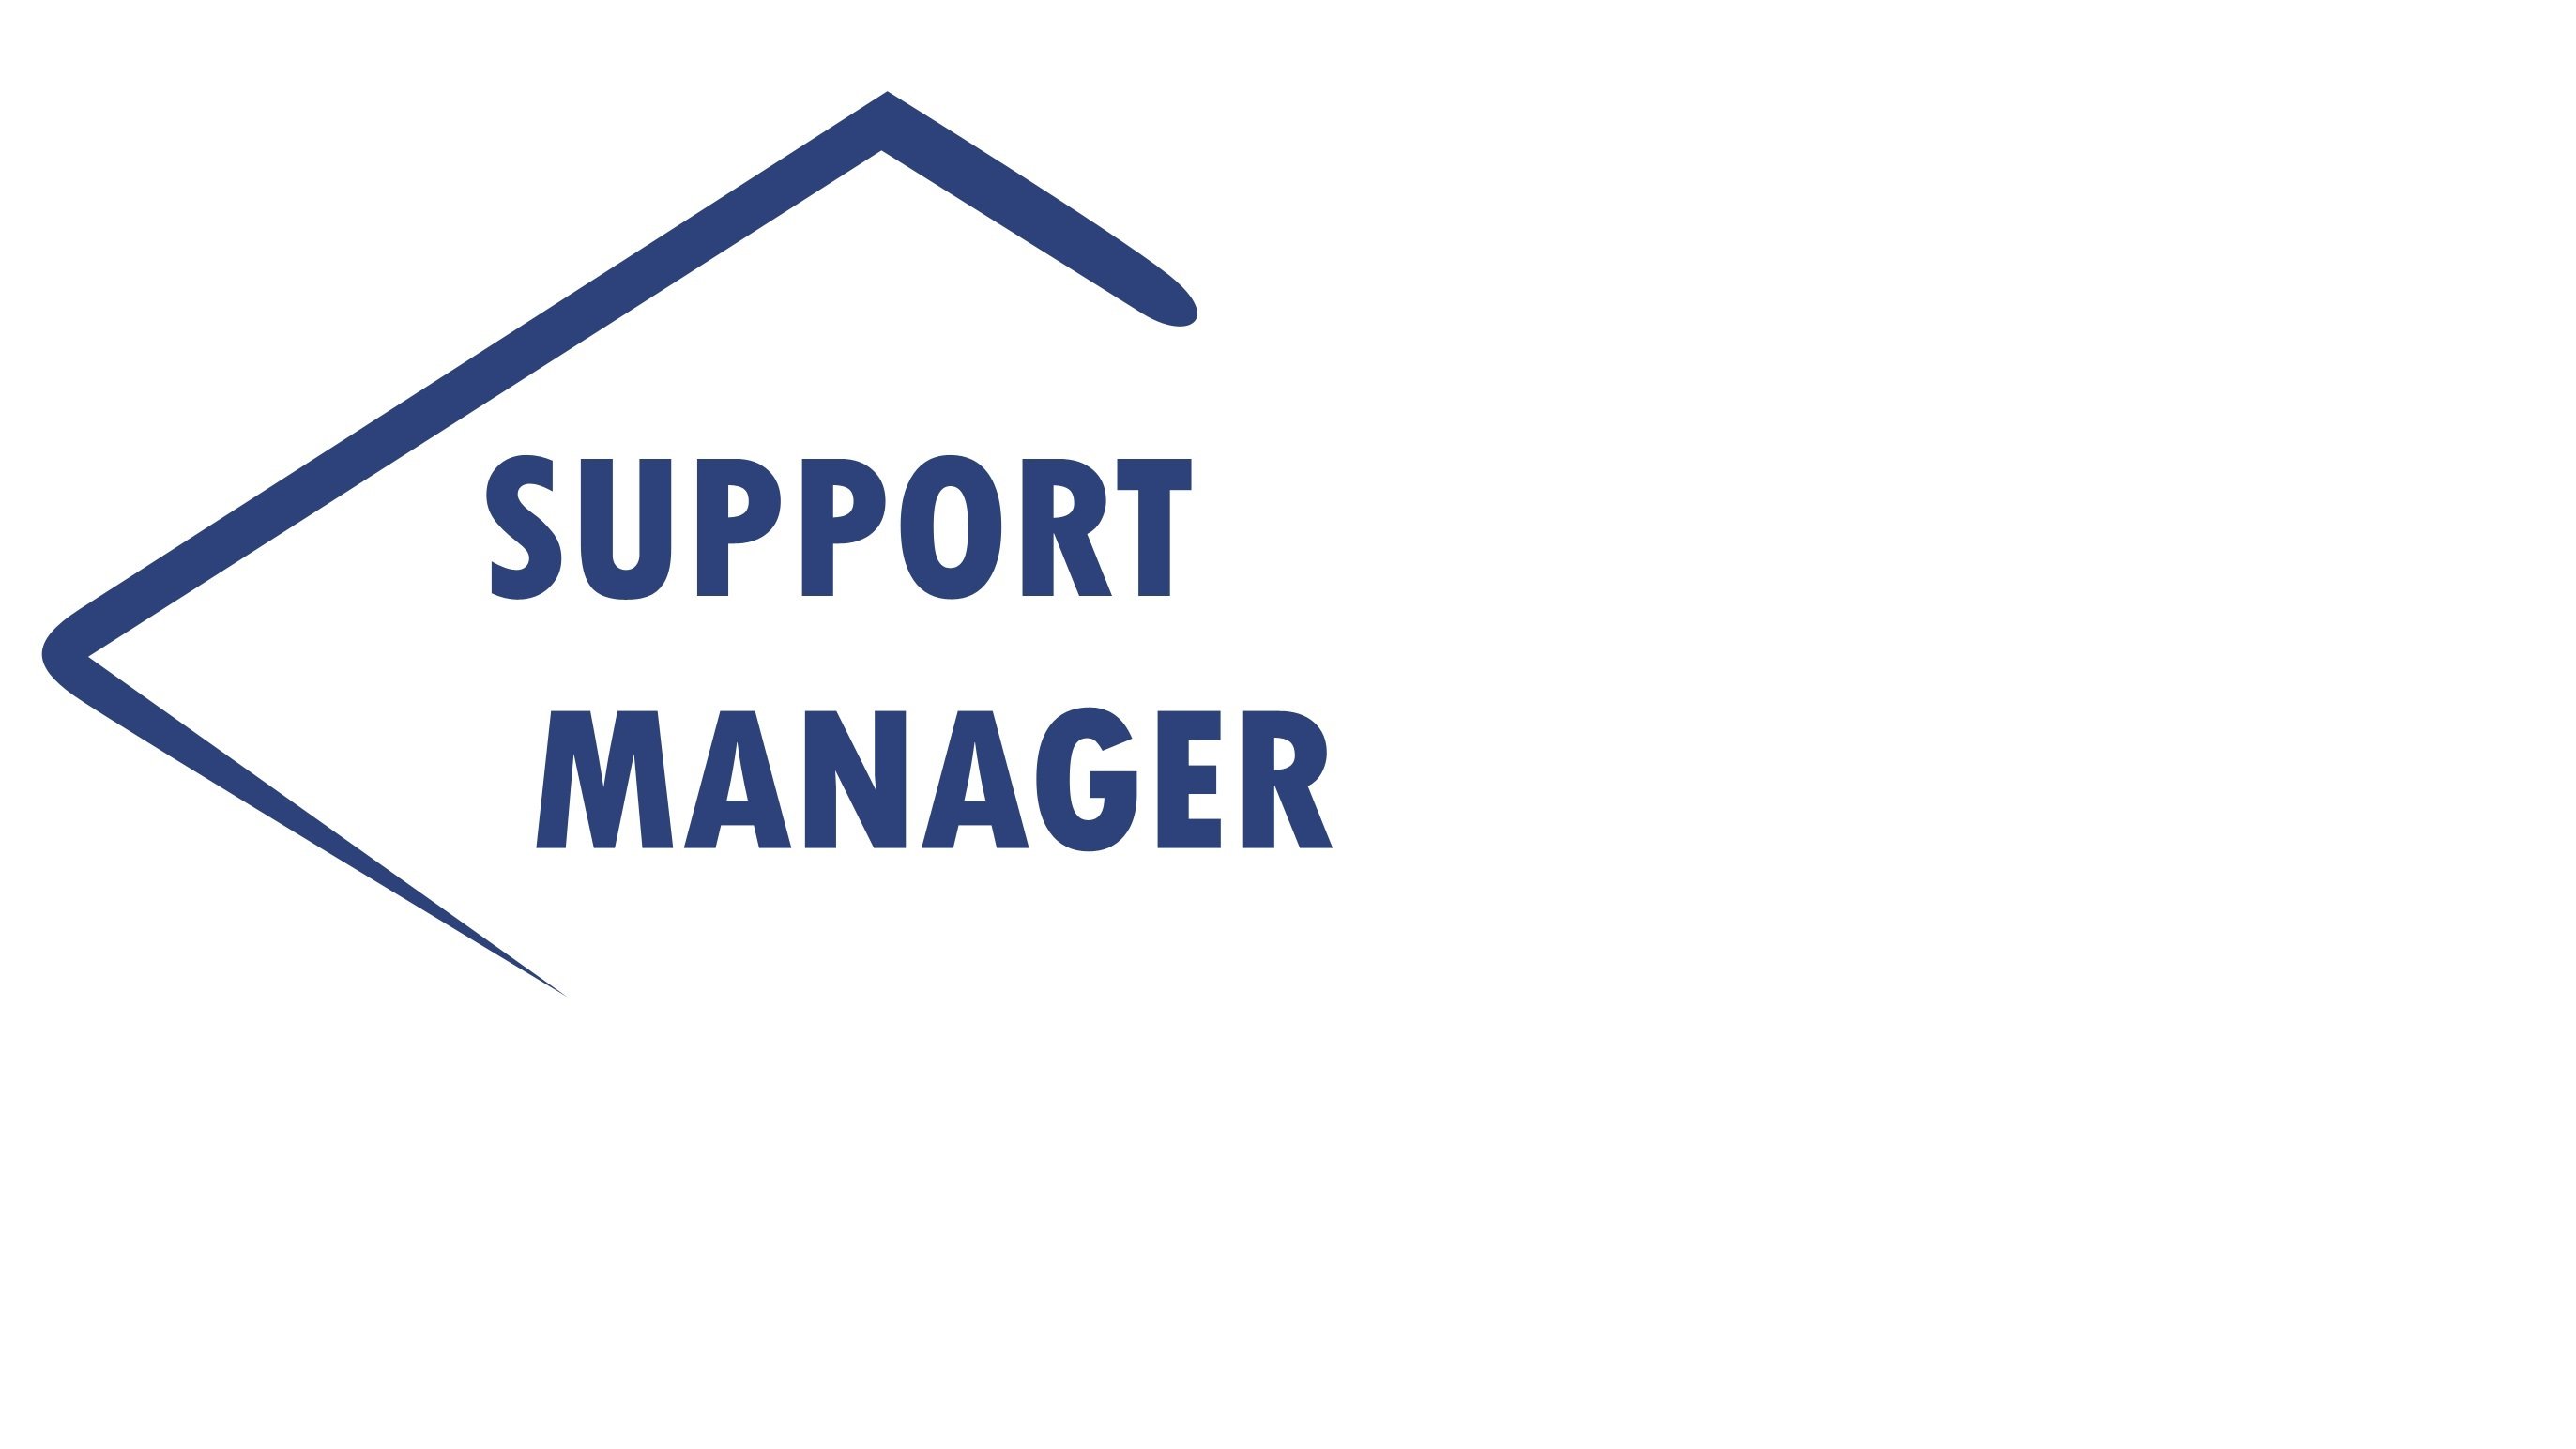 Support Manager